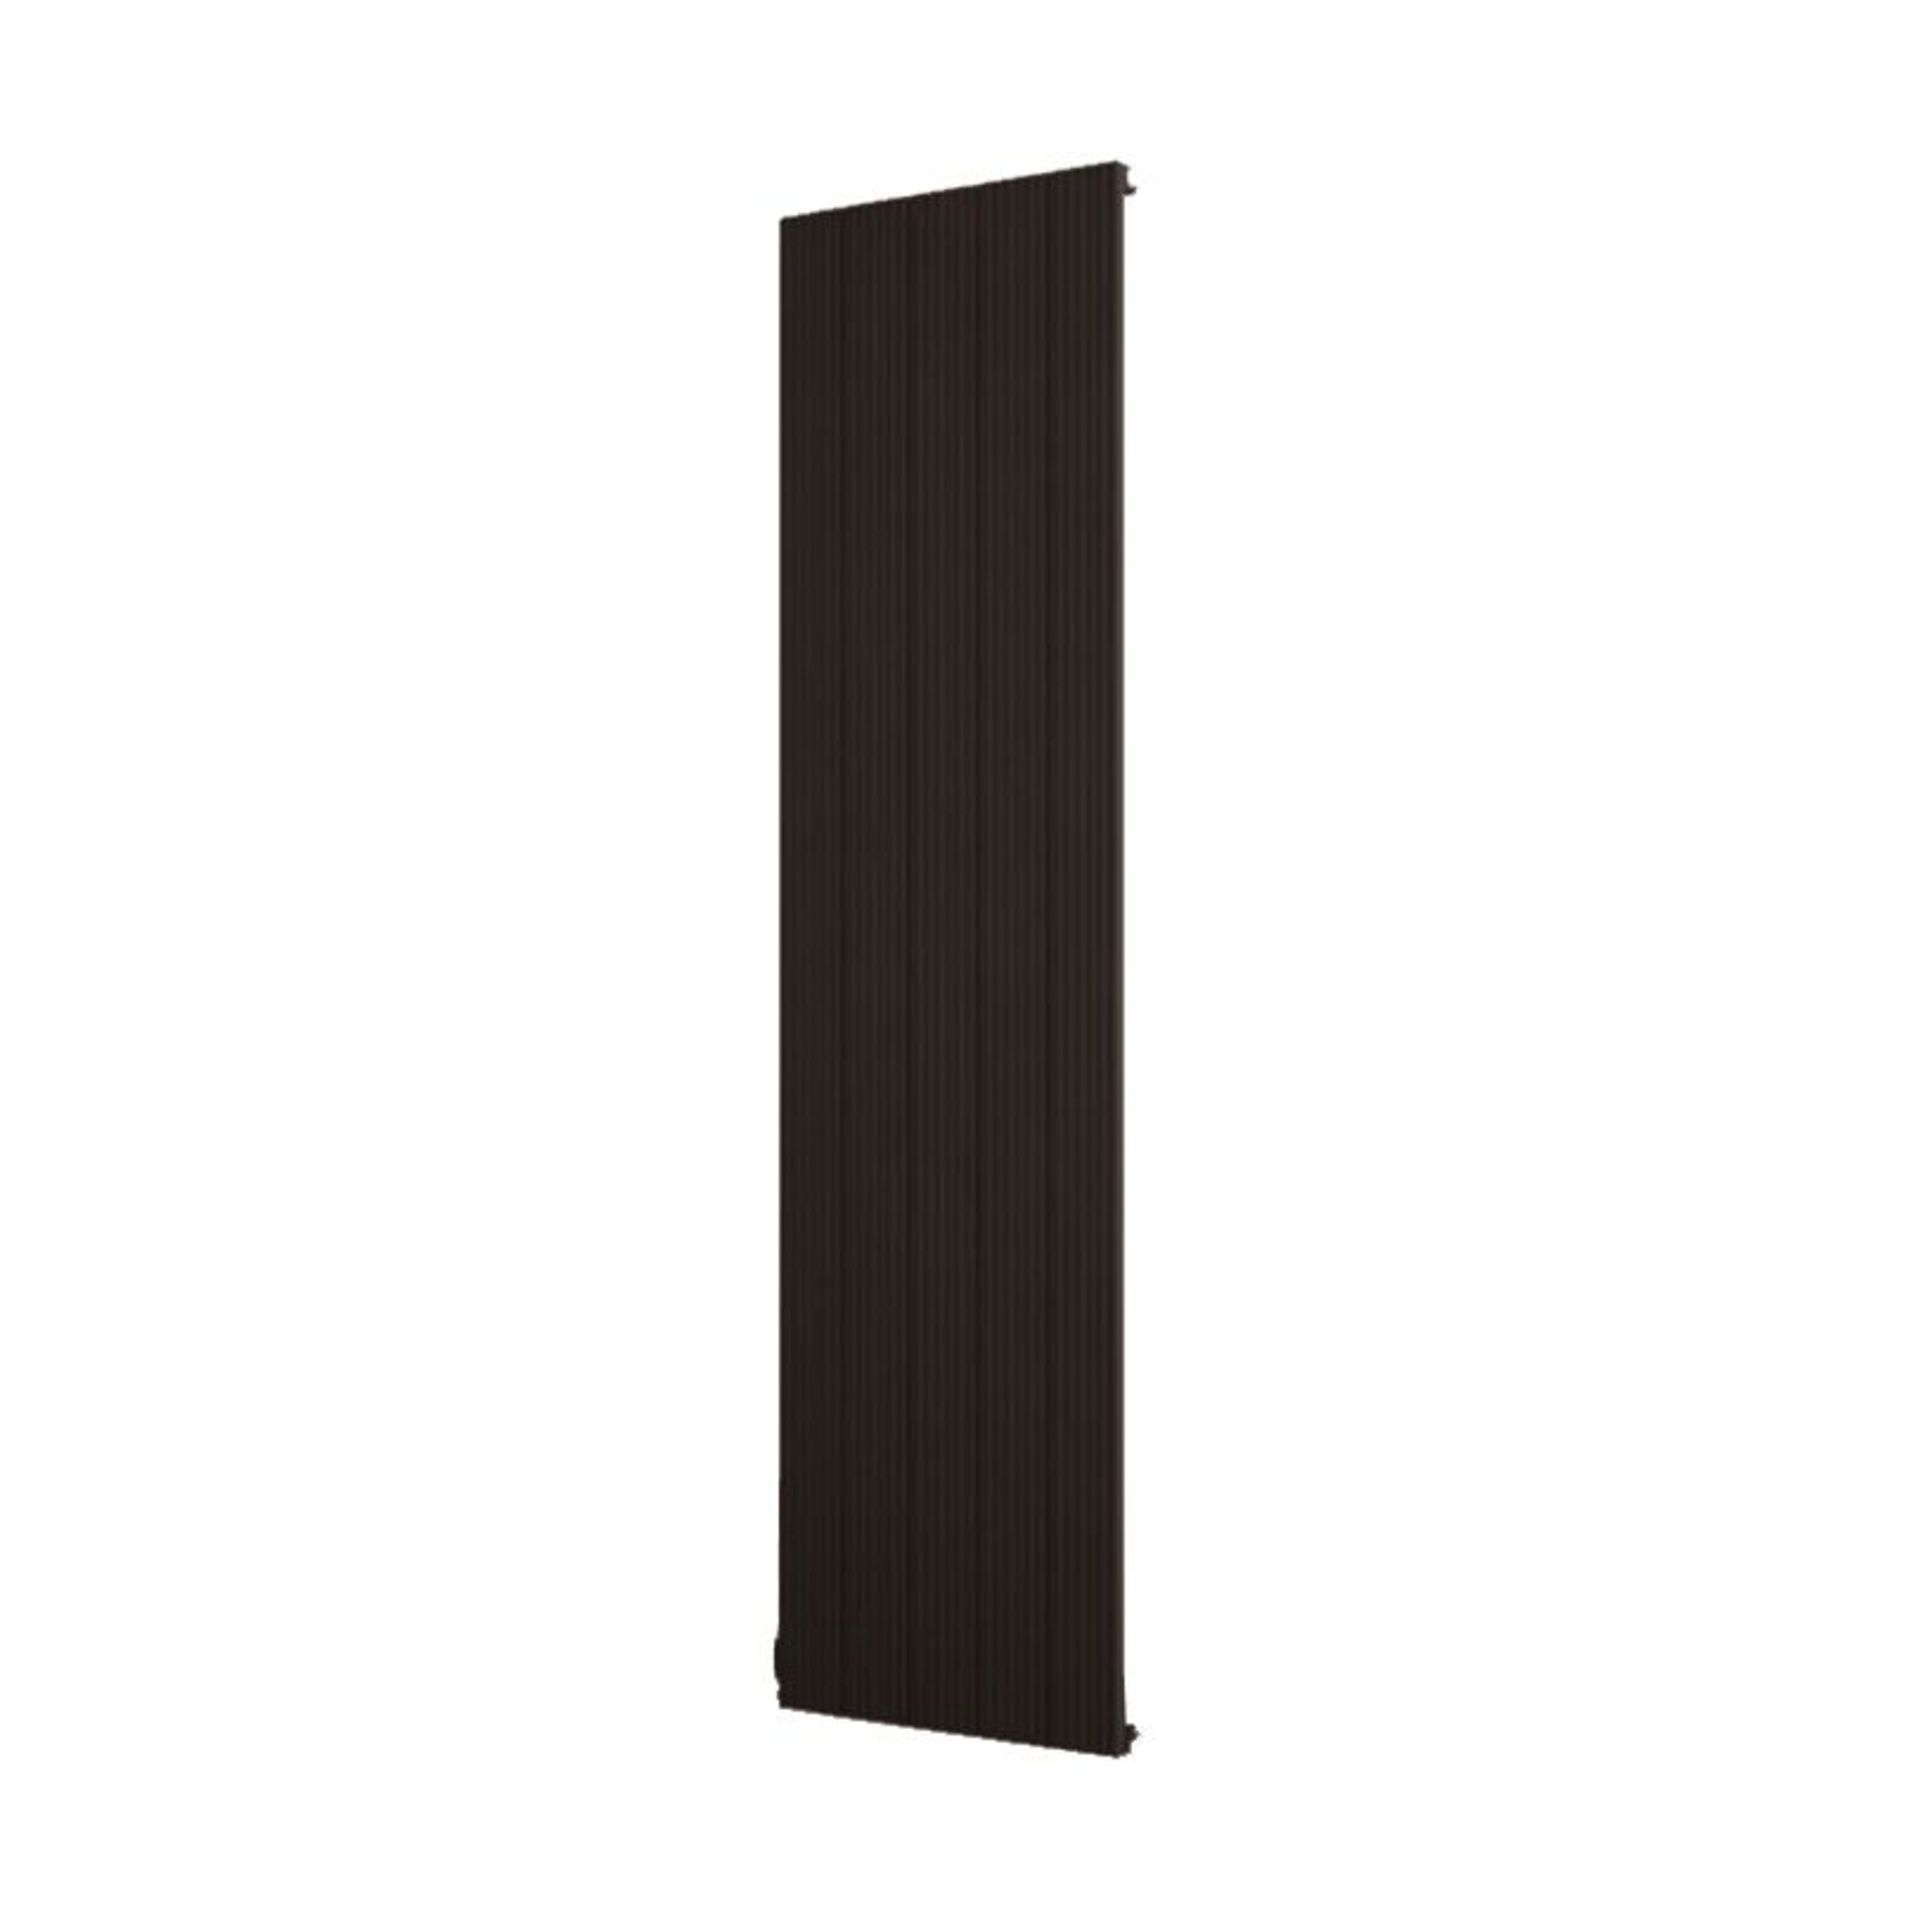 Carisa Nemo Monza textured Black radiator, 1800x470mm, has wall brackets, cannot see any damge